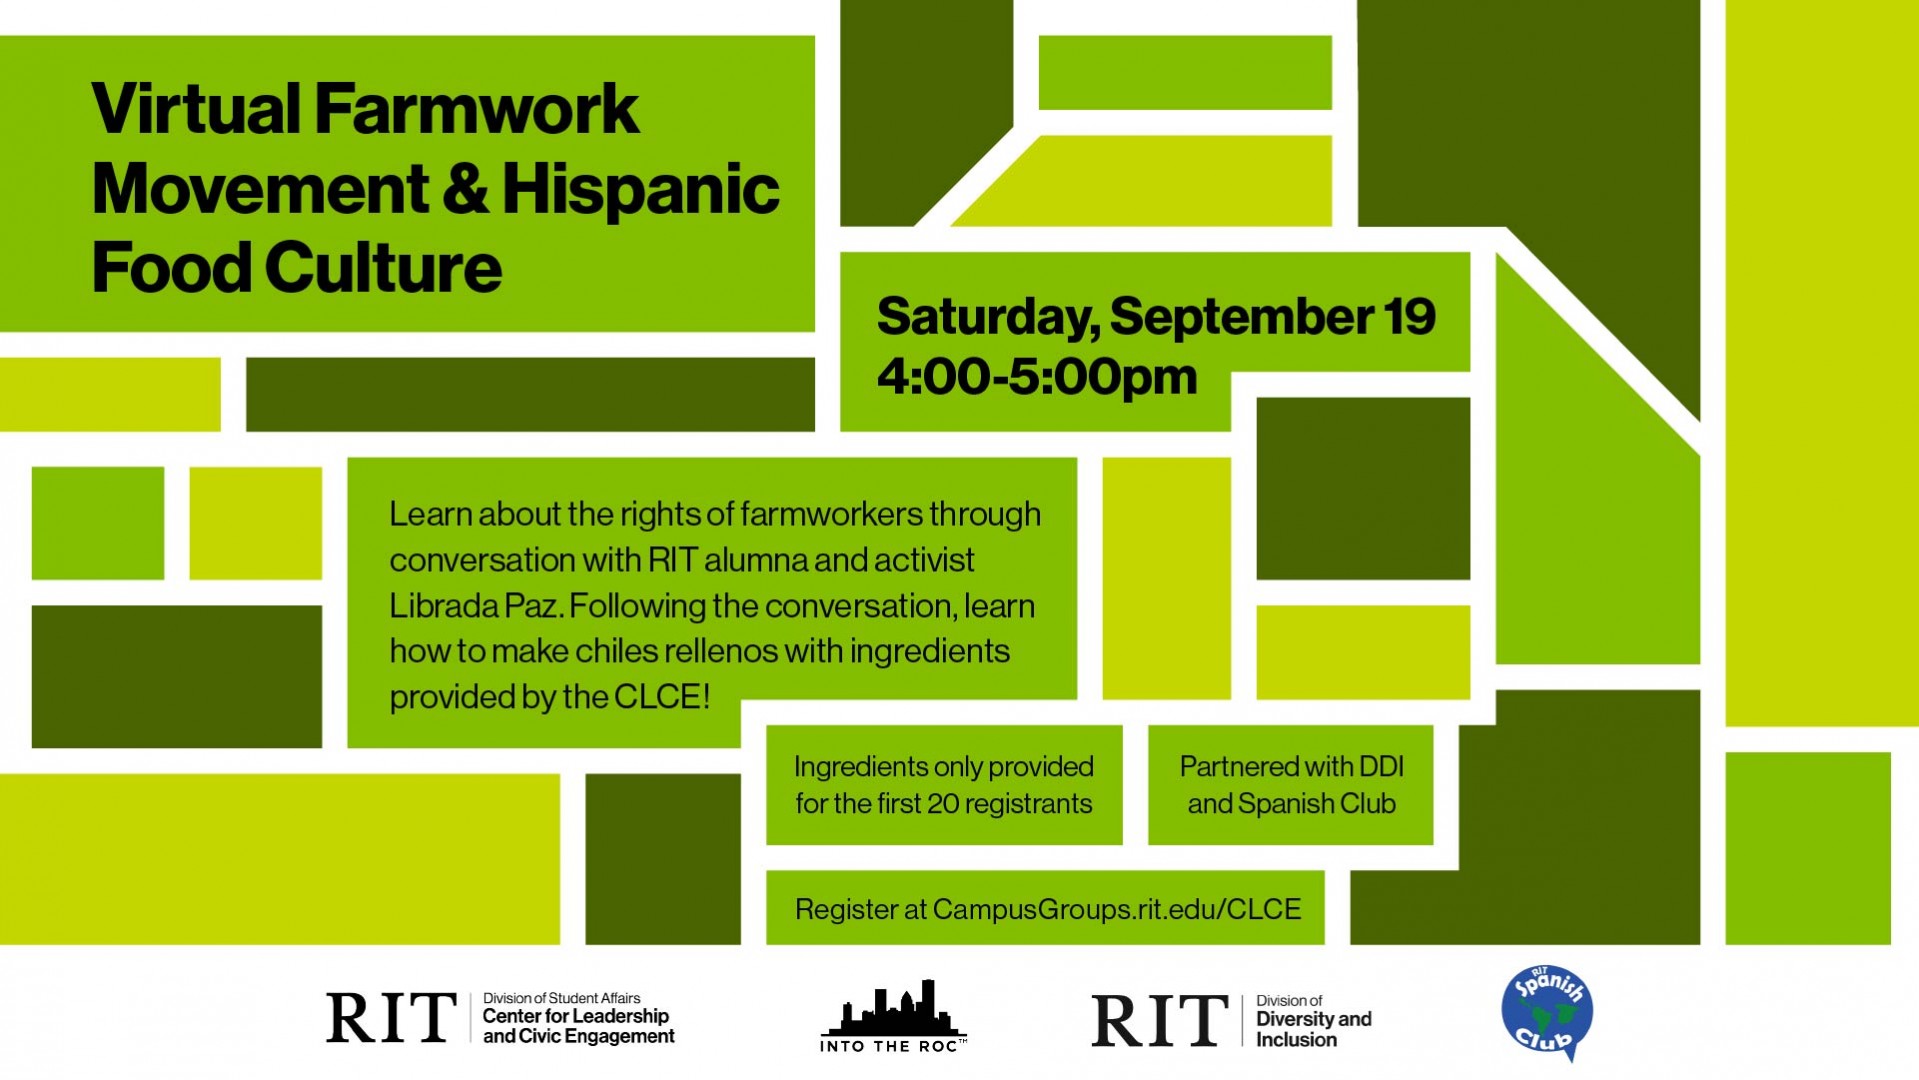 Into the ROC: Virtual Farmworker Movement & Hispanic Food Culture. Saturday, September 19 from 4 until 5pm. Learn about the rights of farmworkers through conversation with RIT alumna and activist Librada Paz. Following the conversation, learn how to make chiles rellenos with ingredients provided by the CLCE! Register at campusgroups.rit.edu/clce